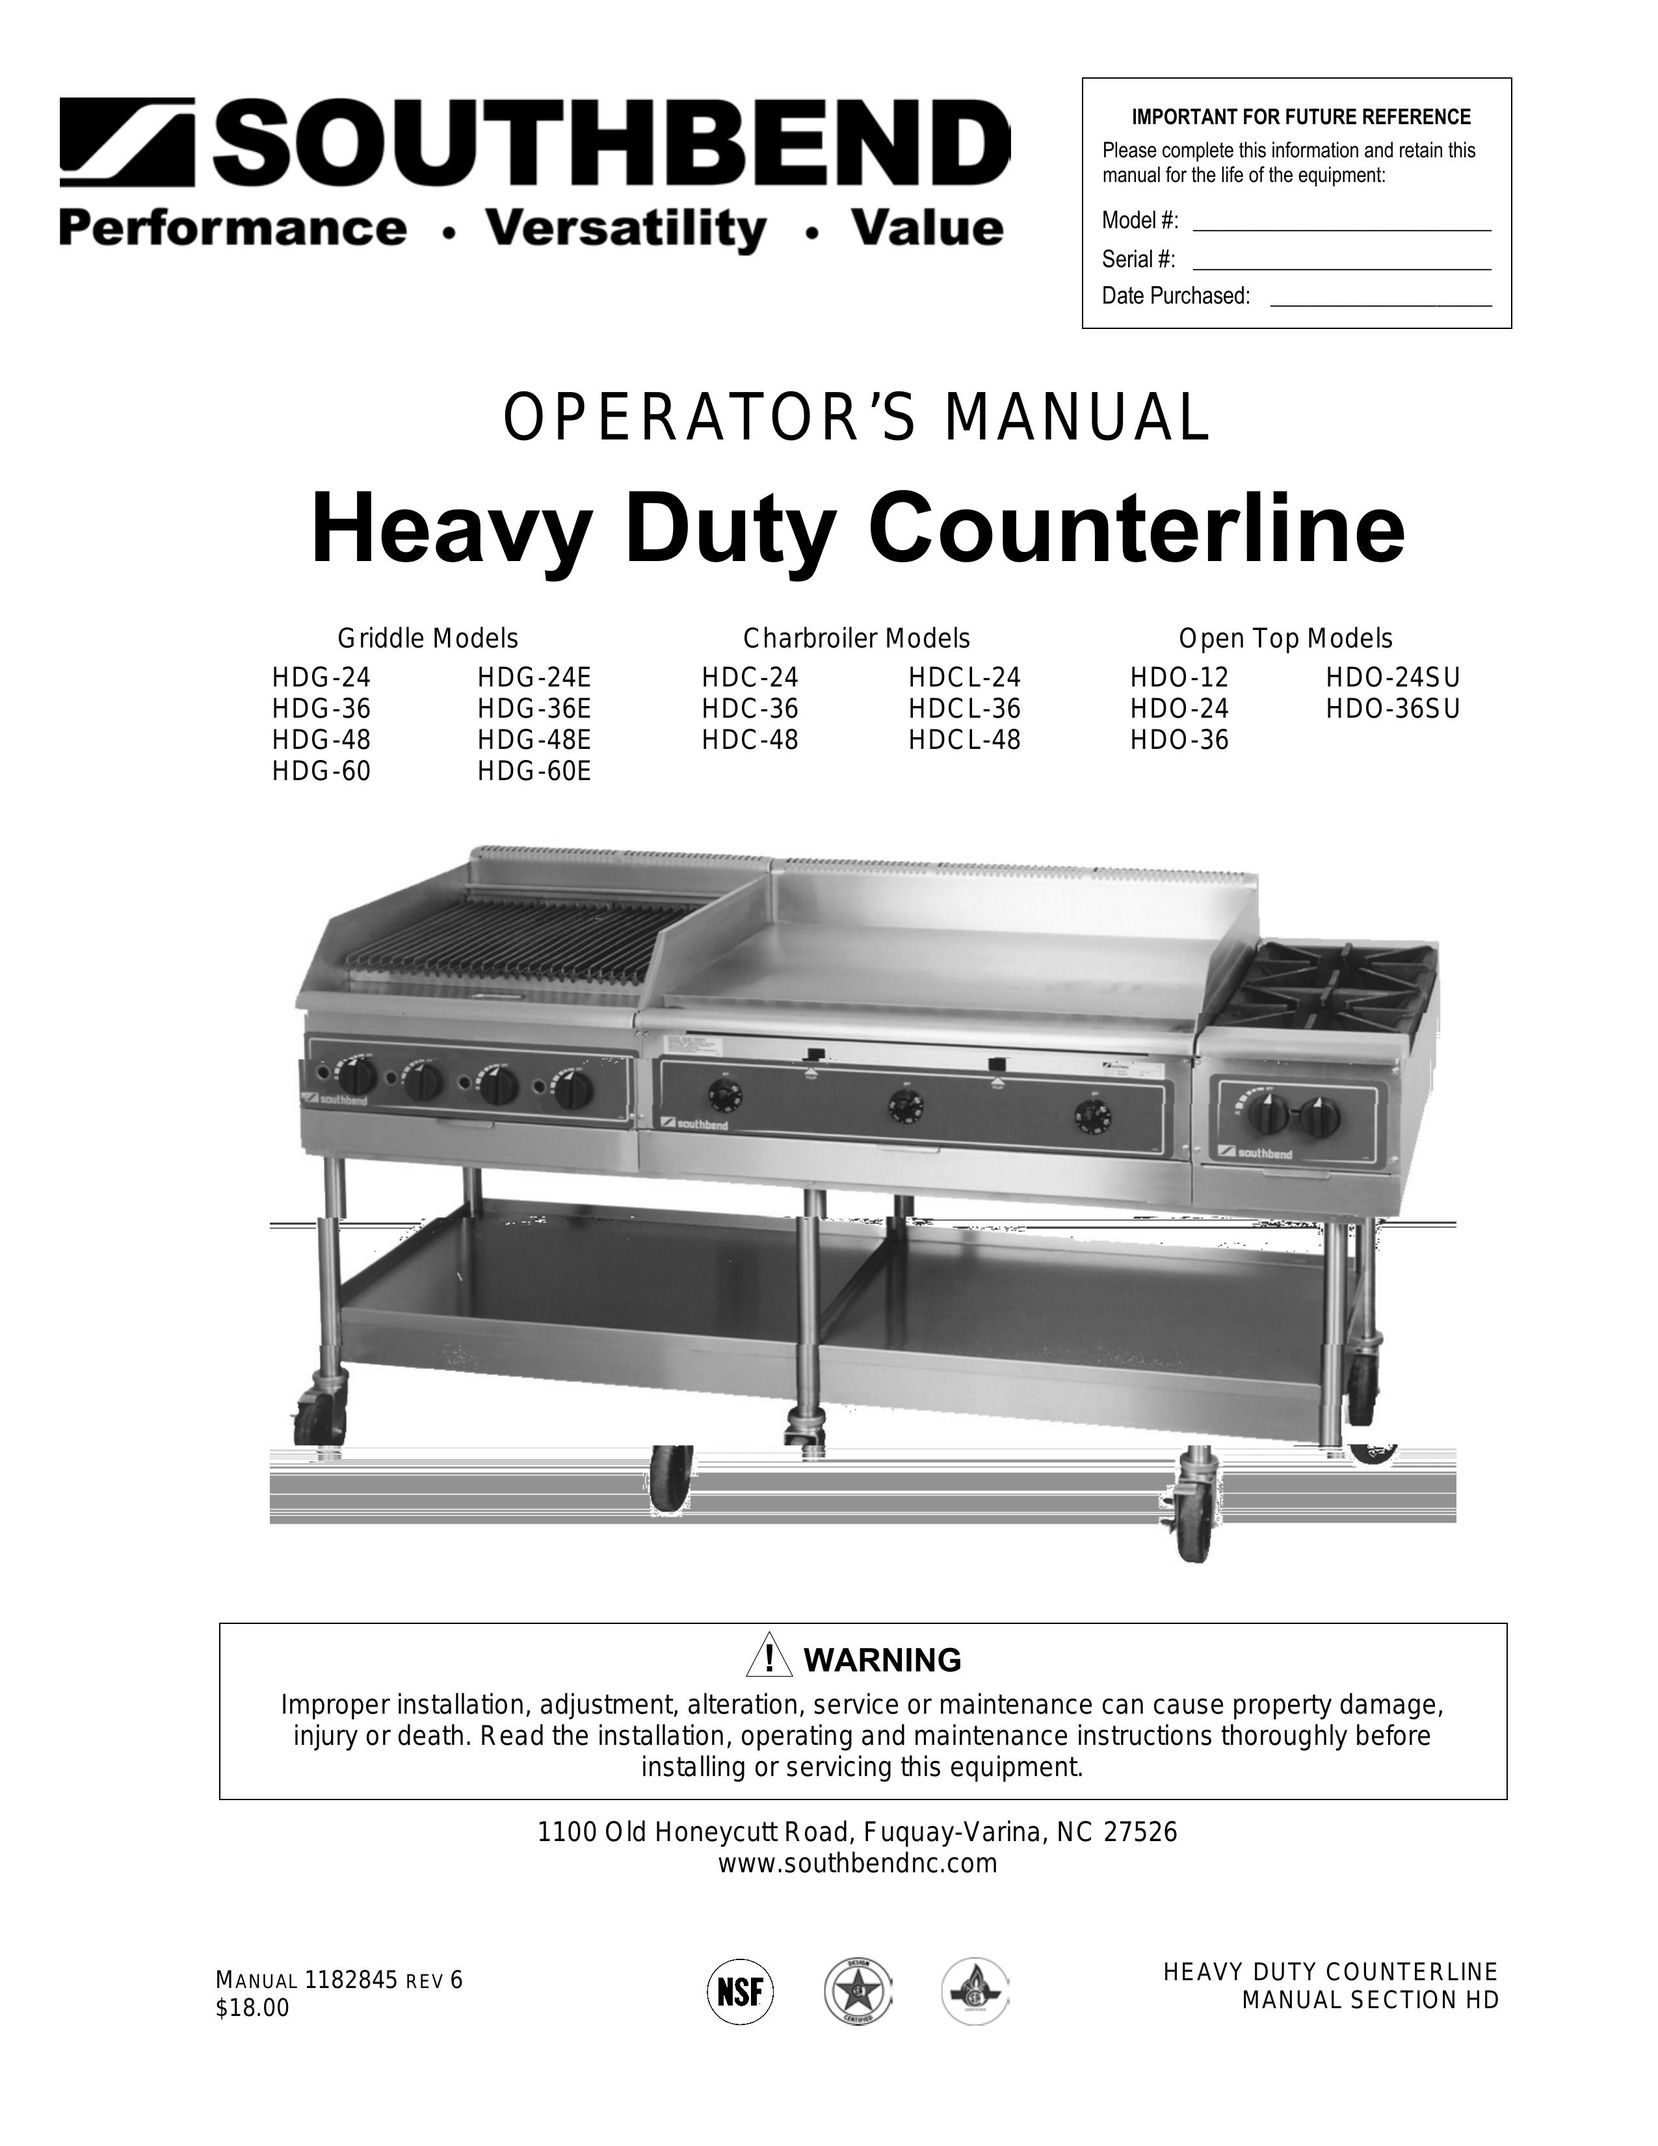 Southbend HDG-48E Cooktop User Manual